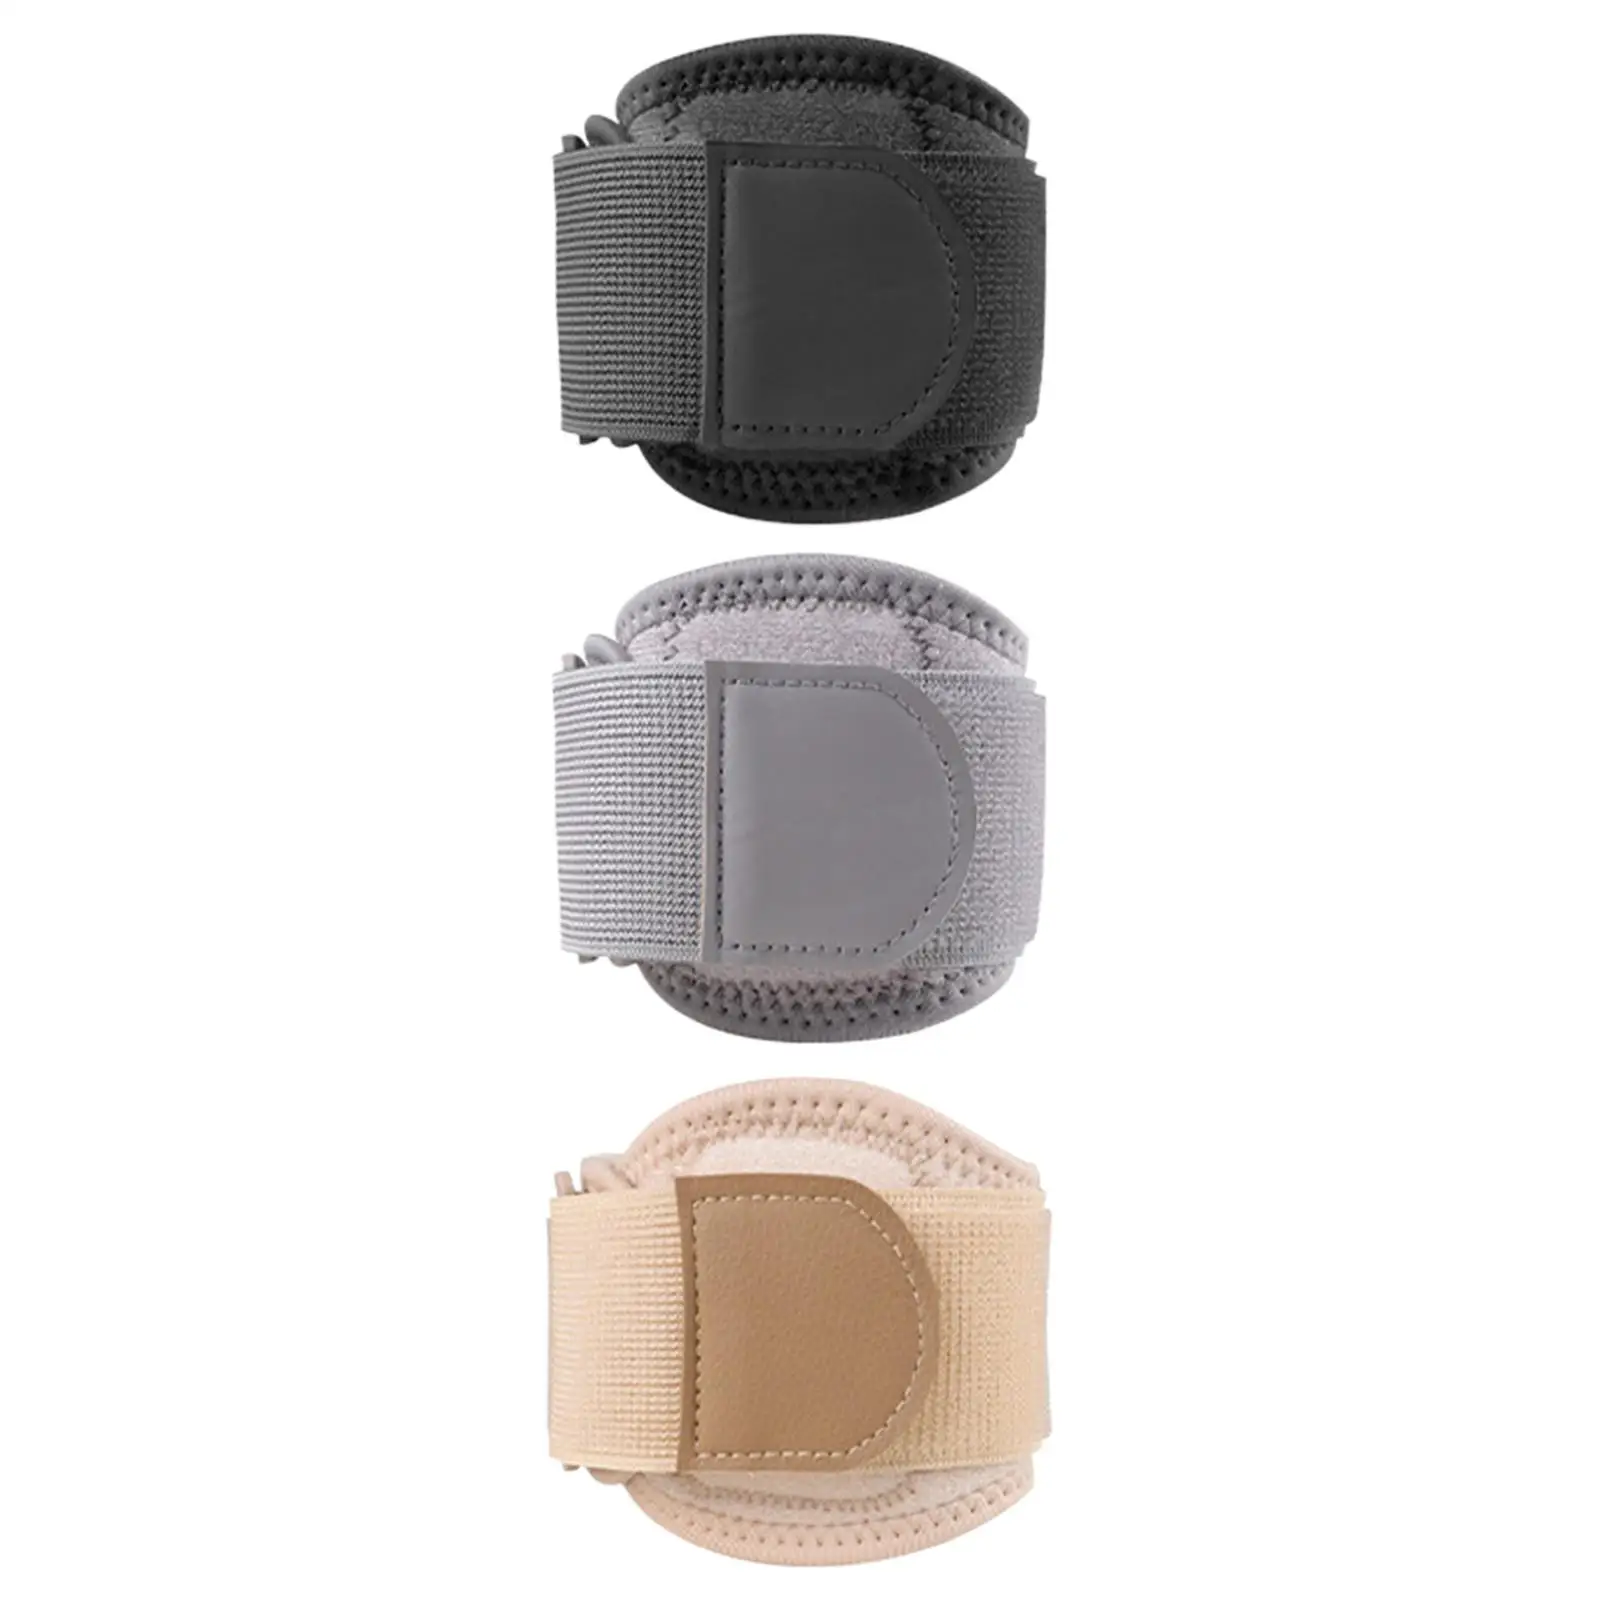 Tennis Elbow Brace Elbow Strap Breathable Unisex Compression Strap Support Golfers Elbow Brace for Basketball Workout Sports Gym